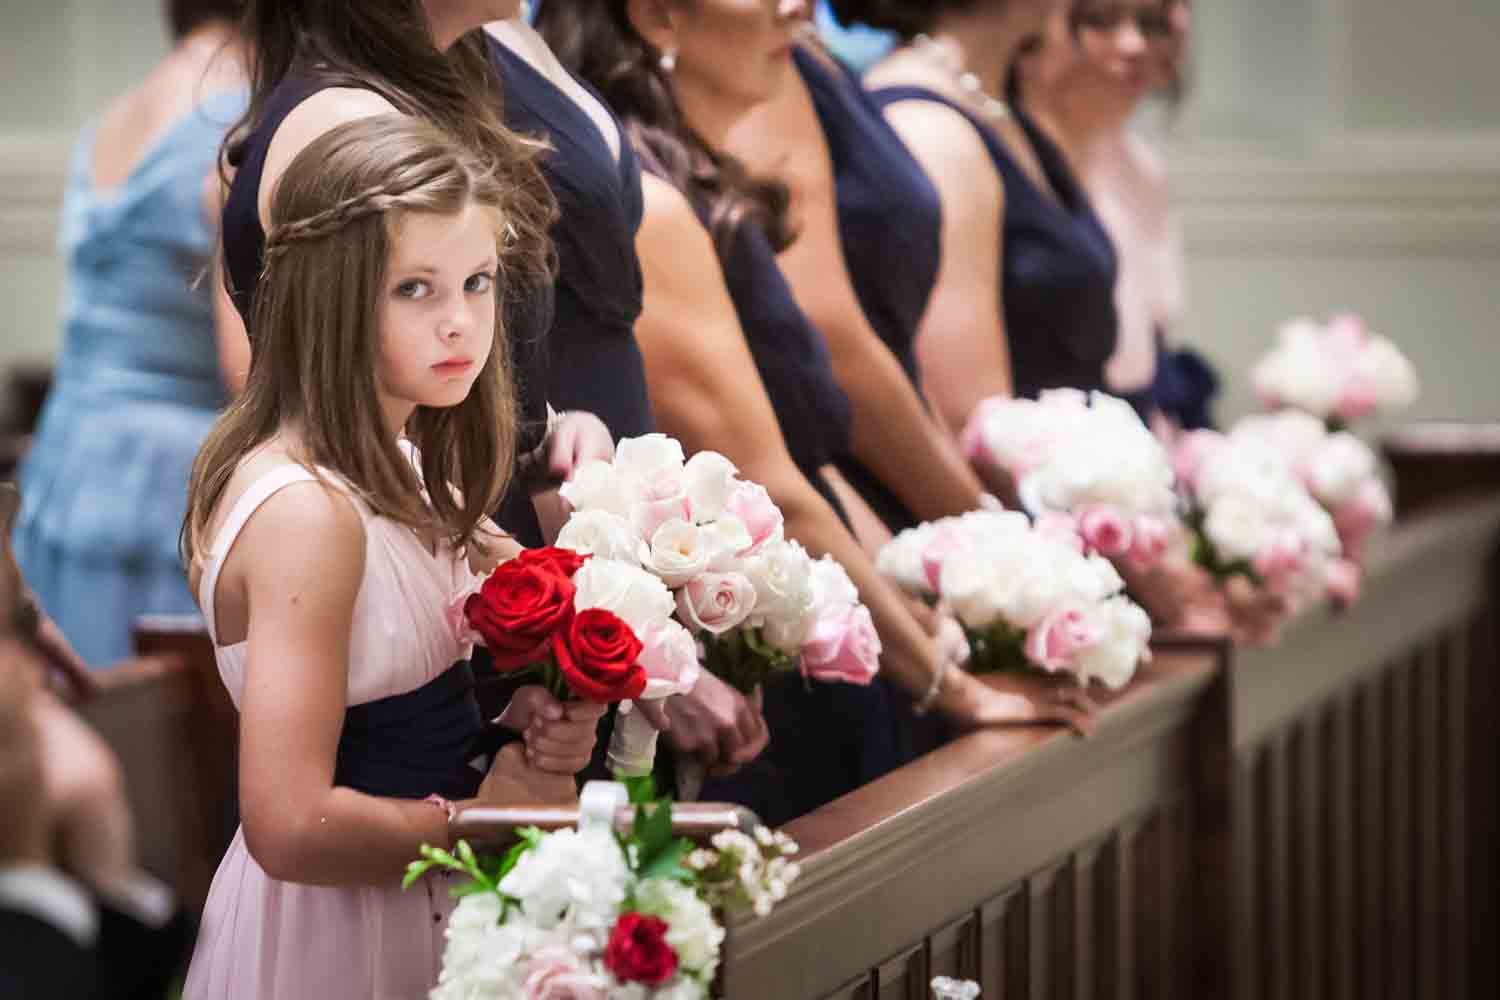 Young flower girl holding bouquet with bridesmaids in background